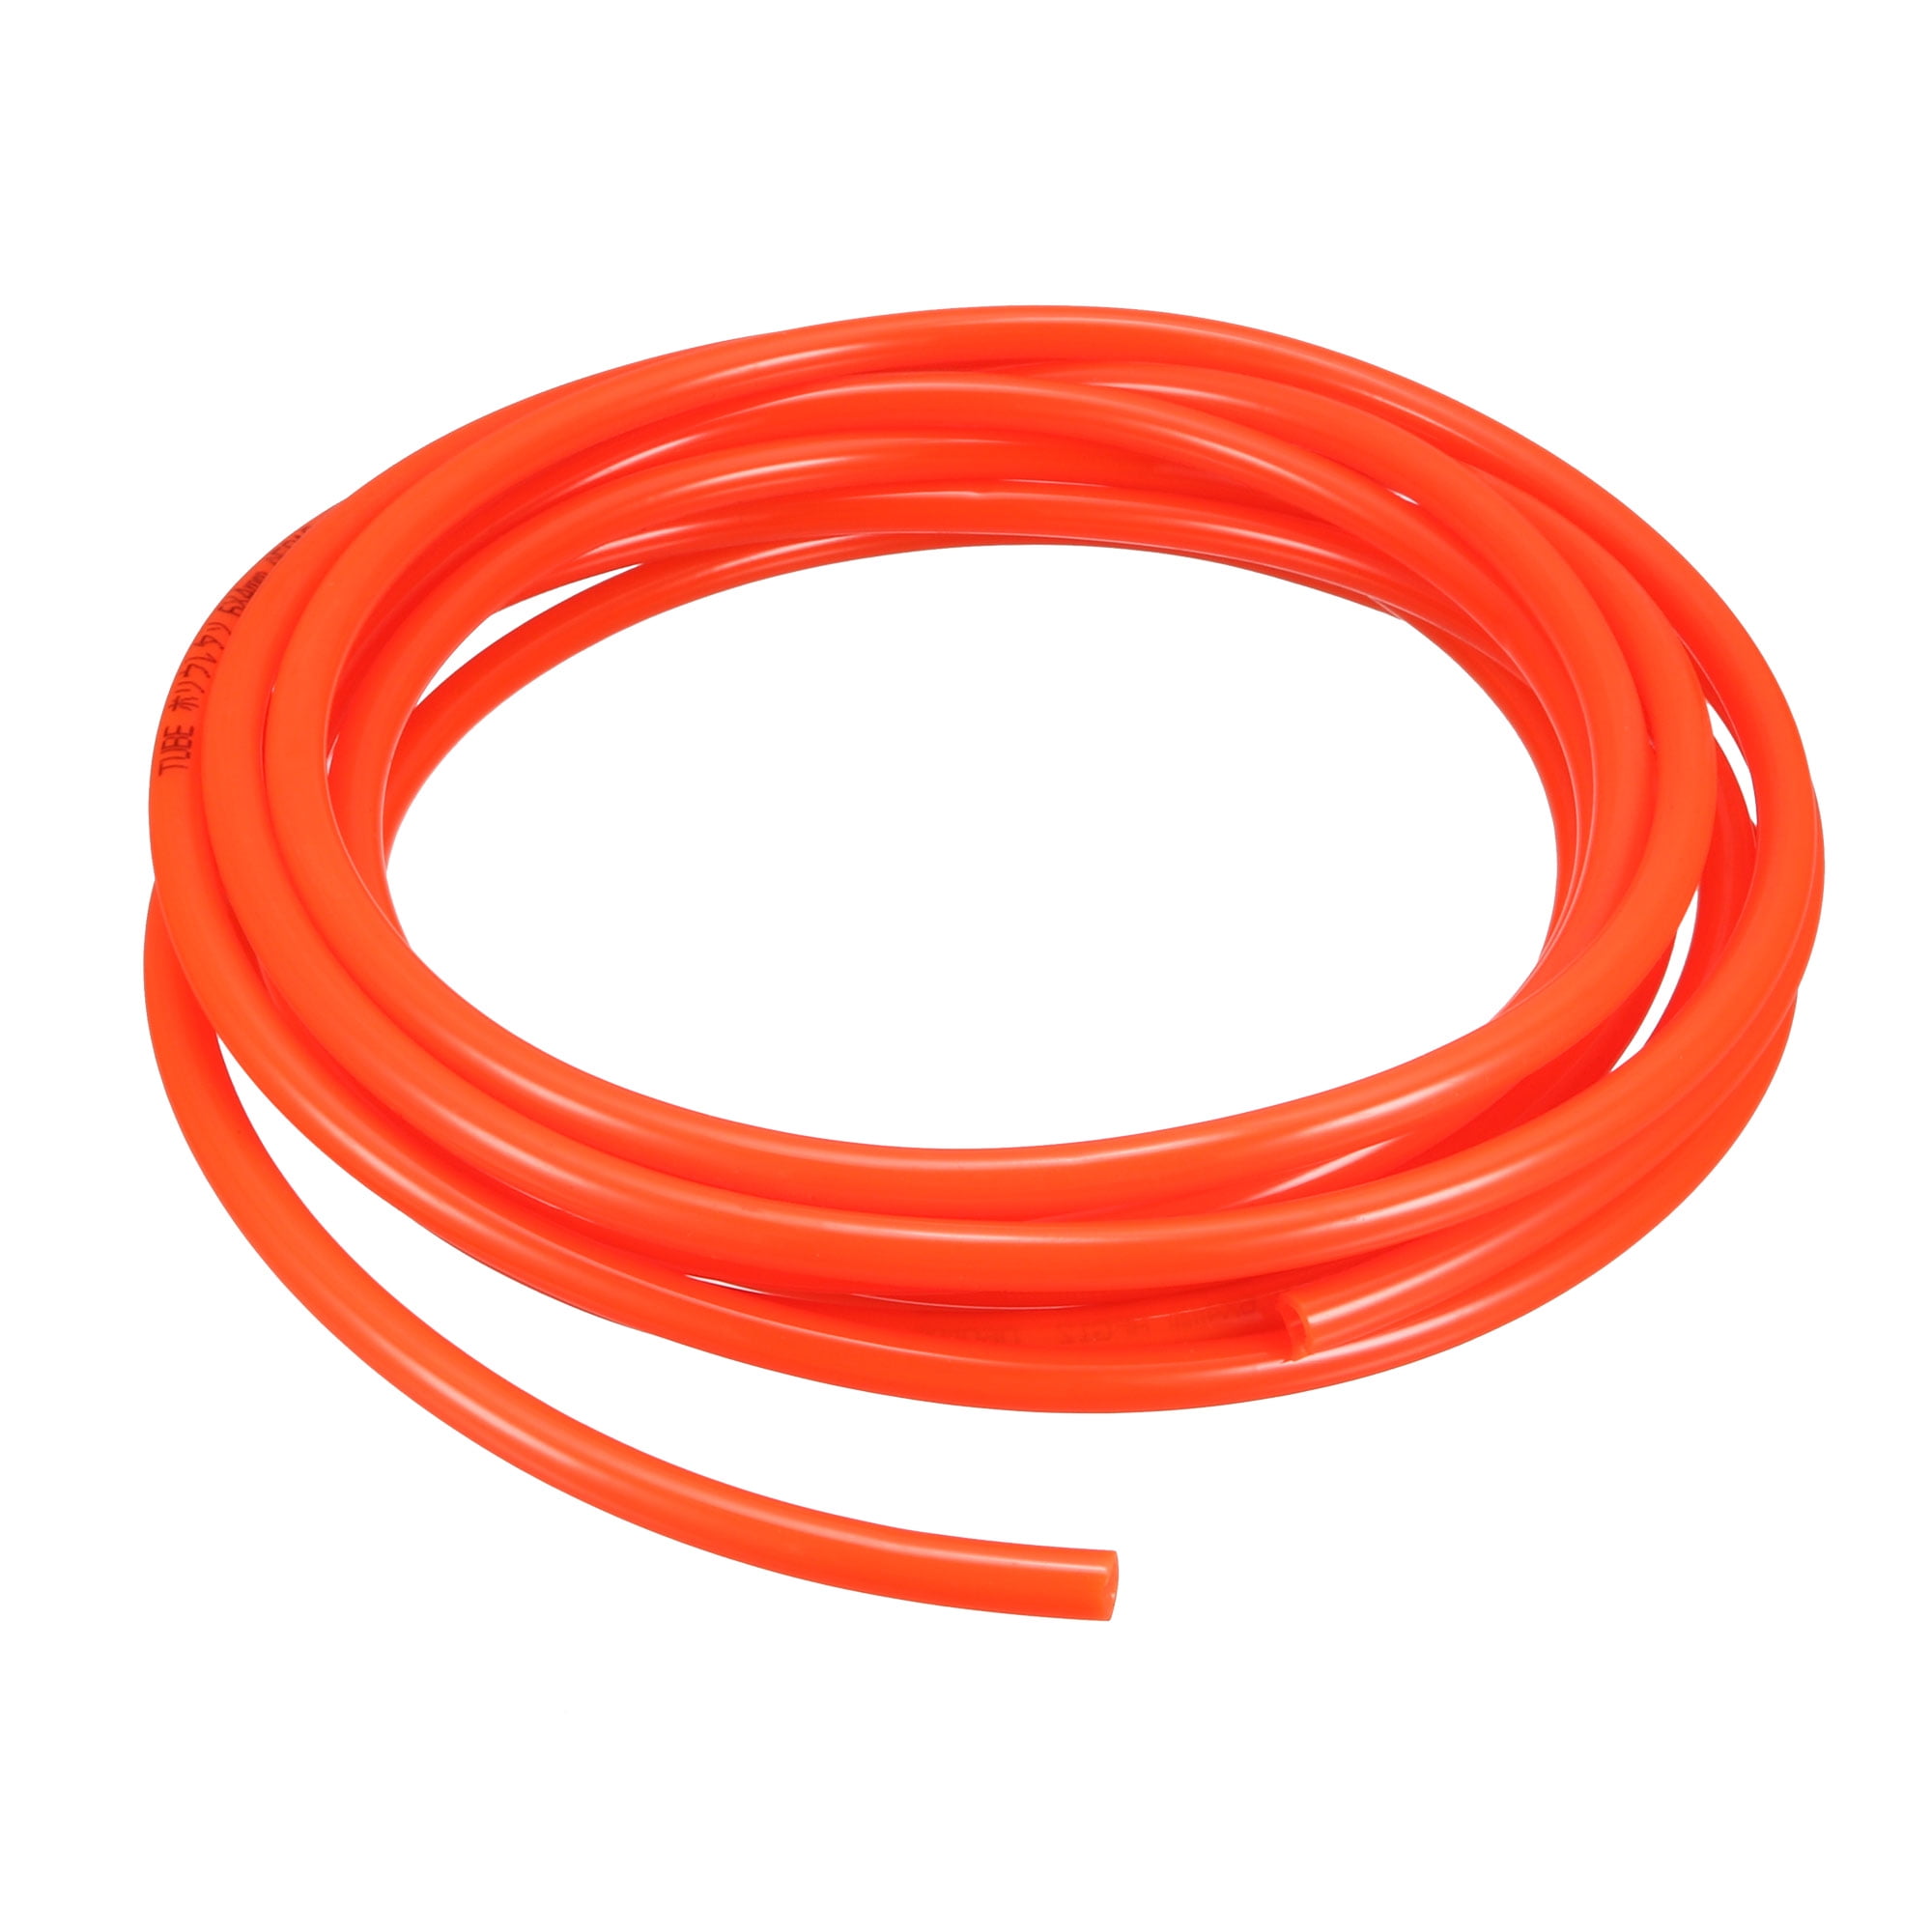 x 5mm OD ID PU Air Tubing Pipe Hose 5 Meter Red Color Fevas 8mm